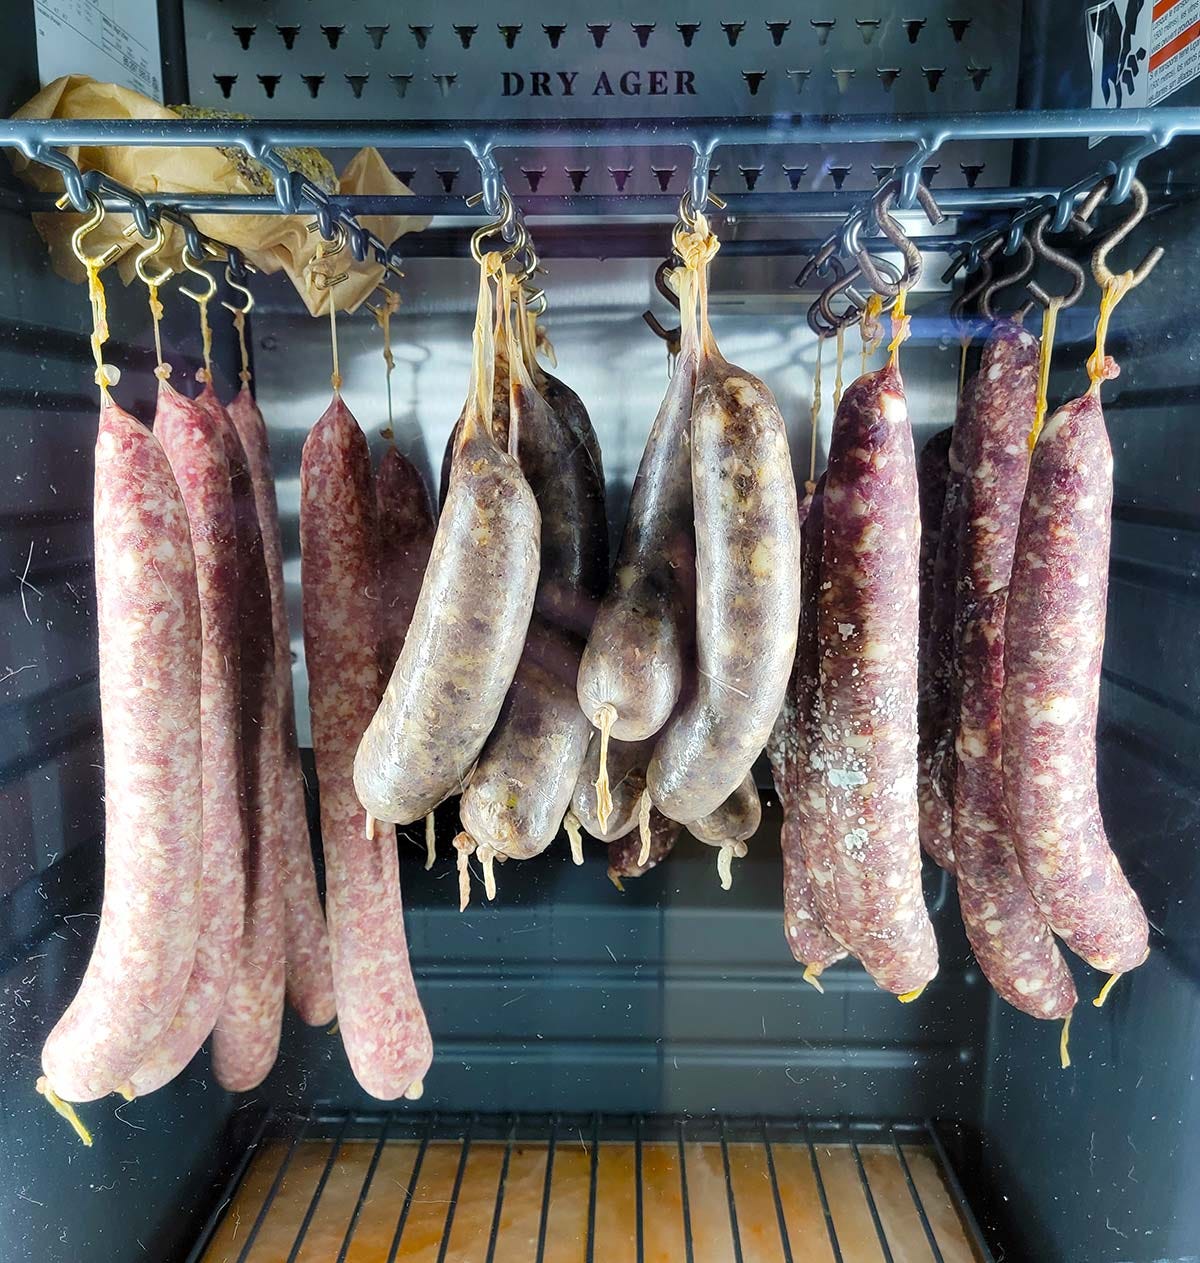 Sausages drying in a curing chamber. 